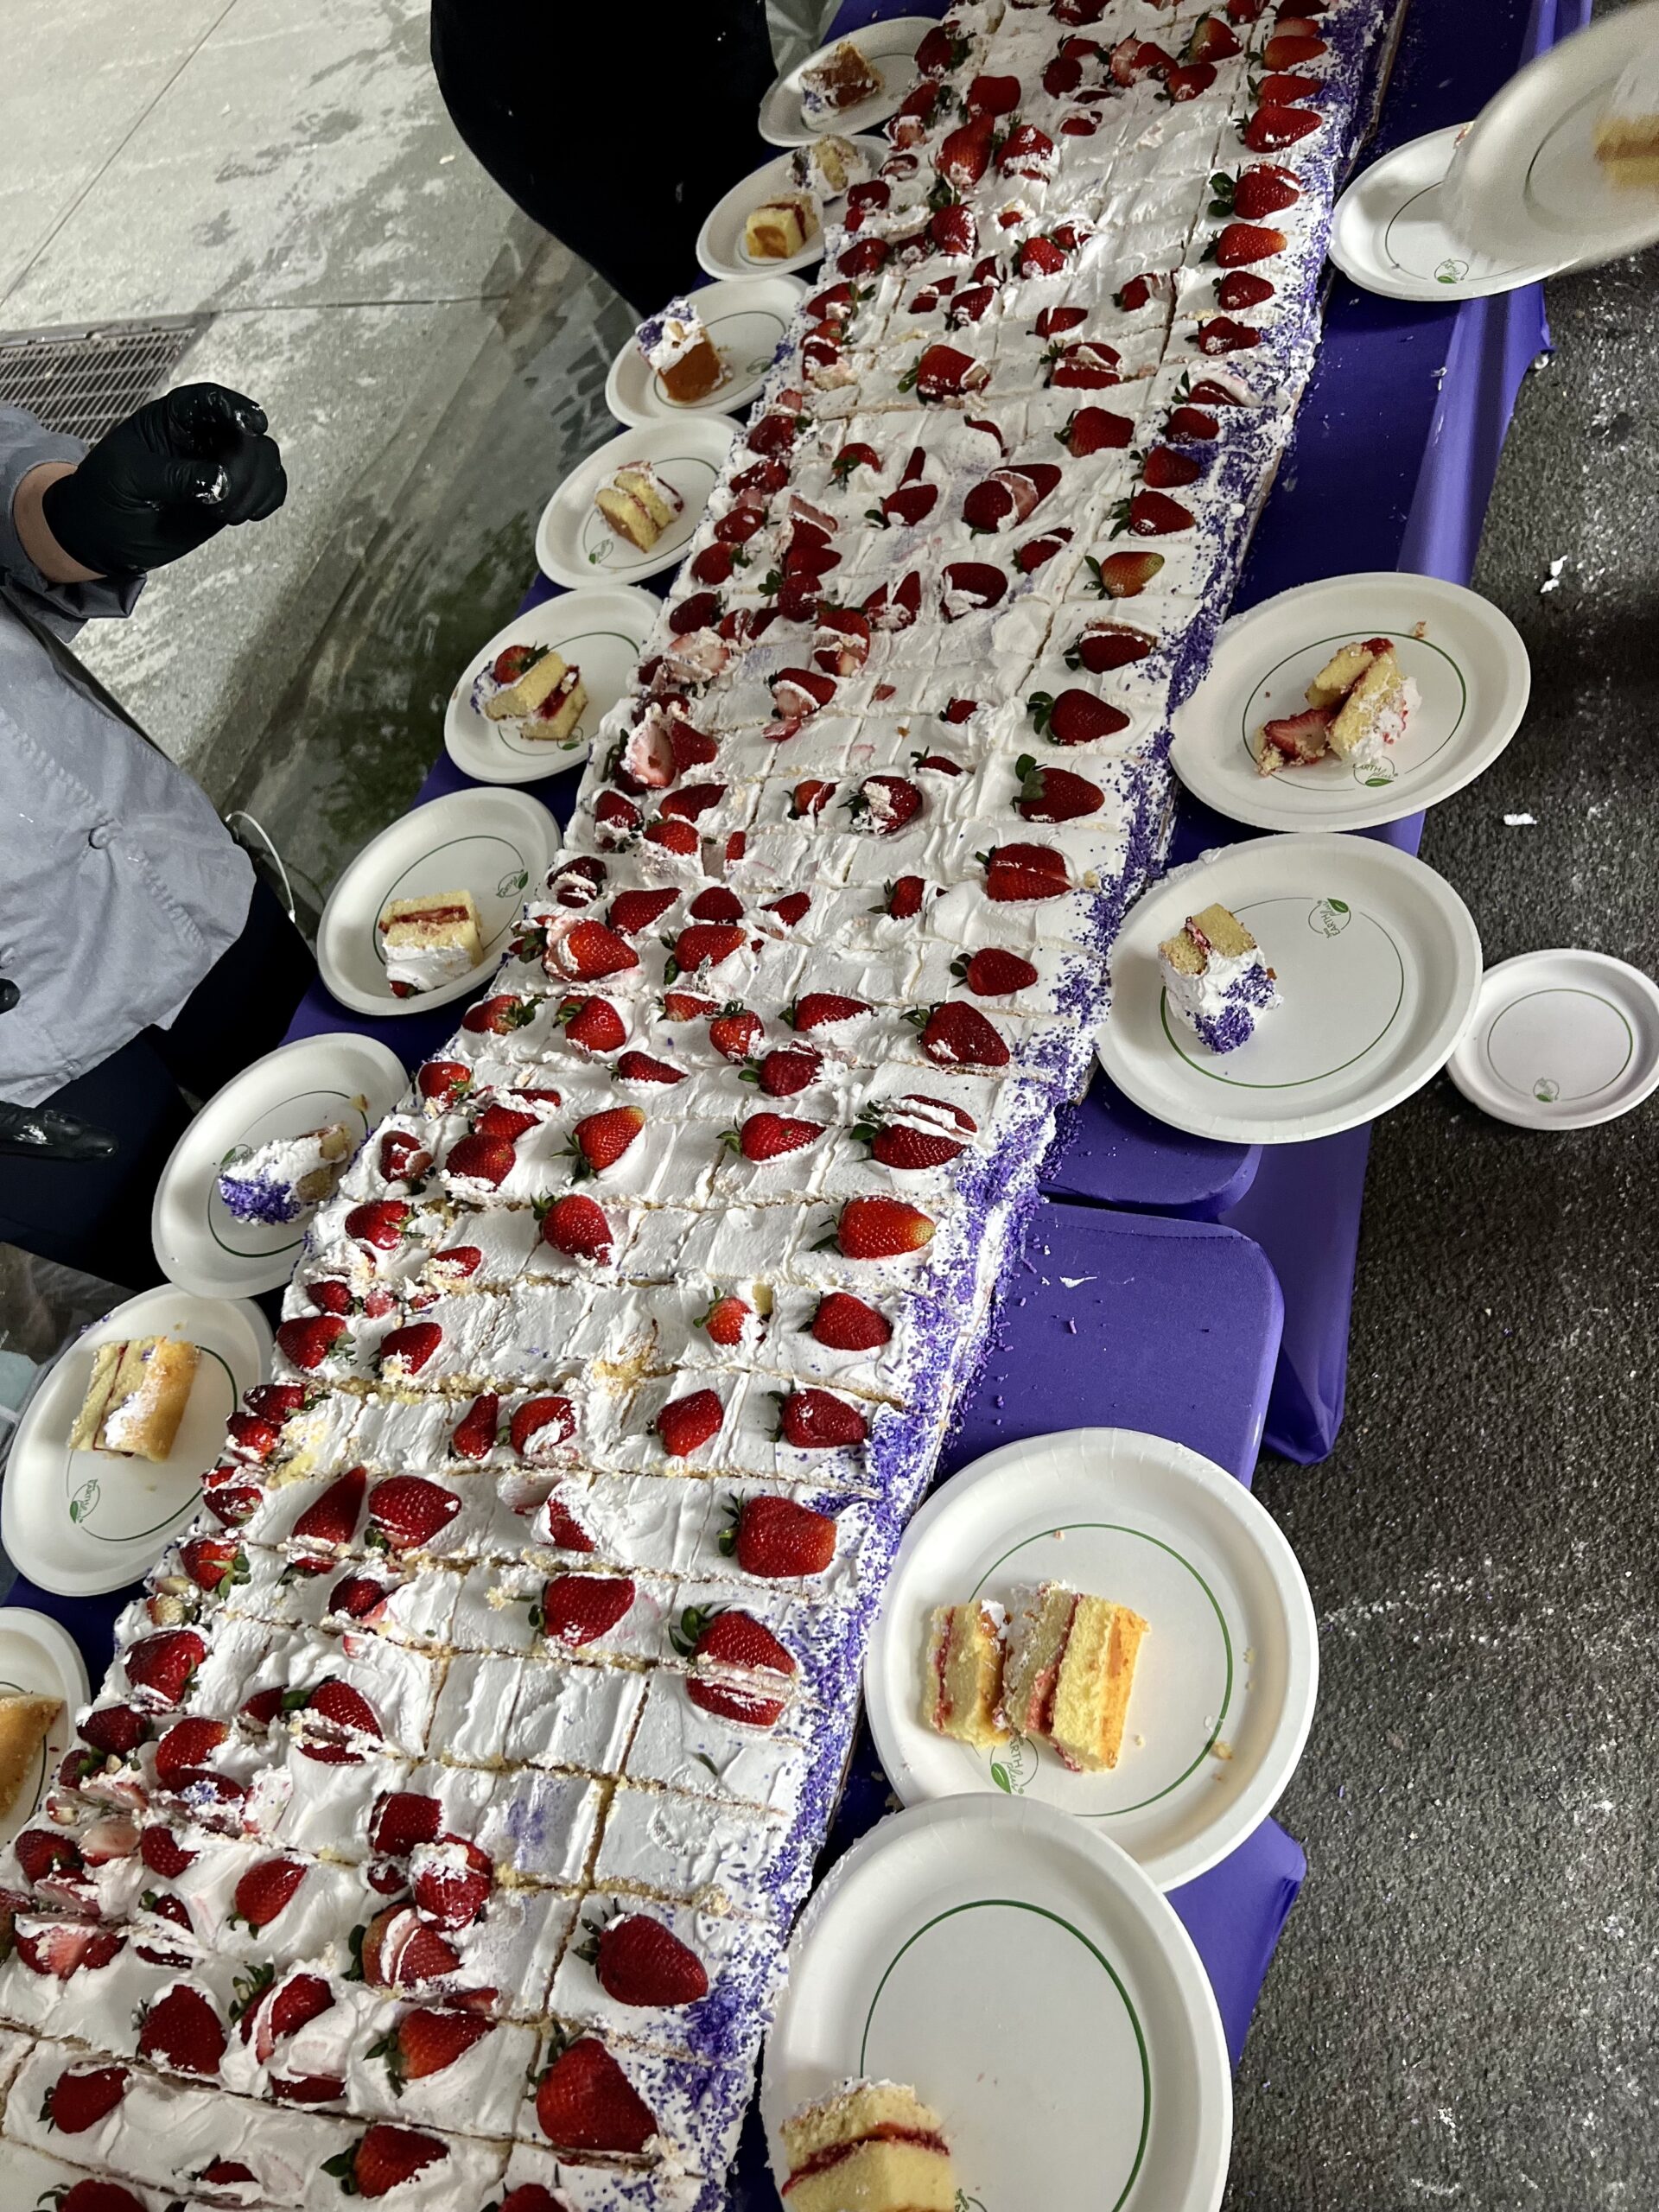 The legendary 160-square-foot Strawberry Fest cake, presented on a table.